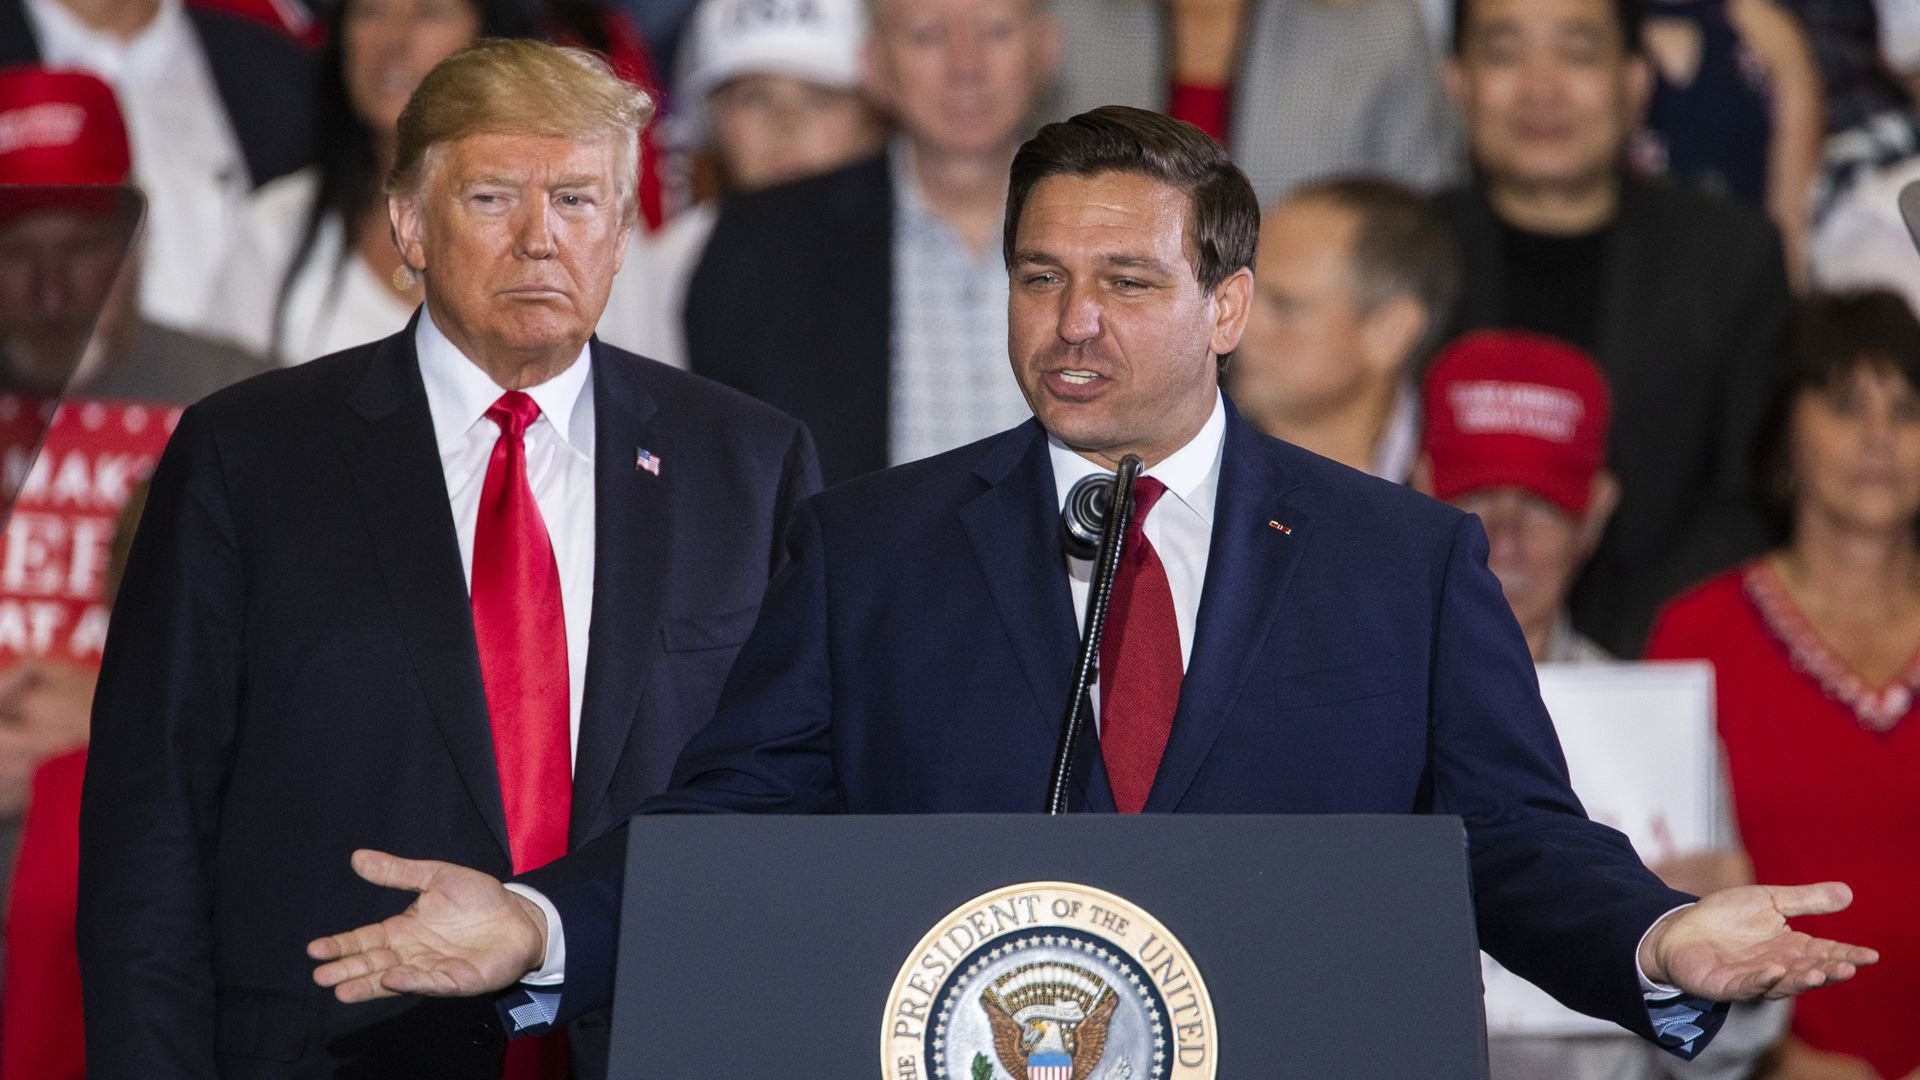 Trump-DeSantis rivalry heats up after Florida governor's campaign launch